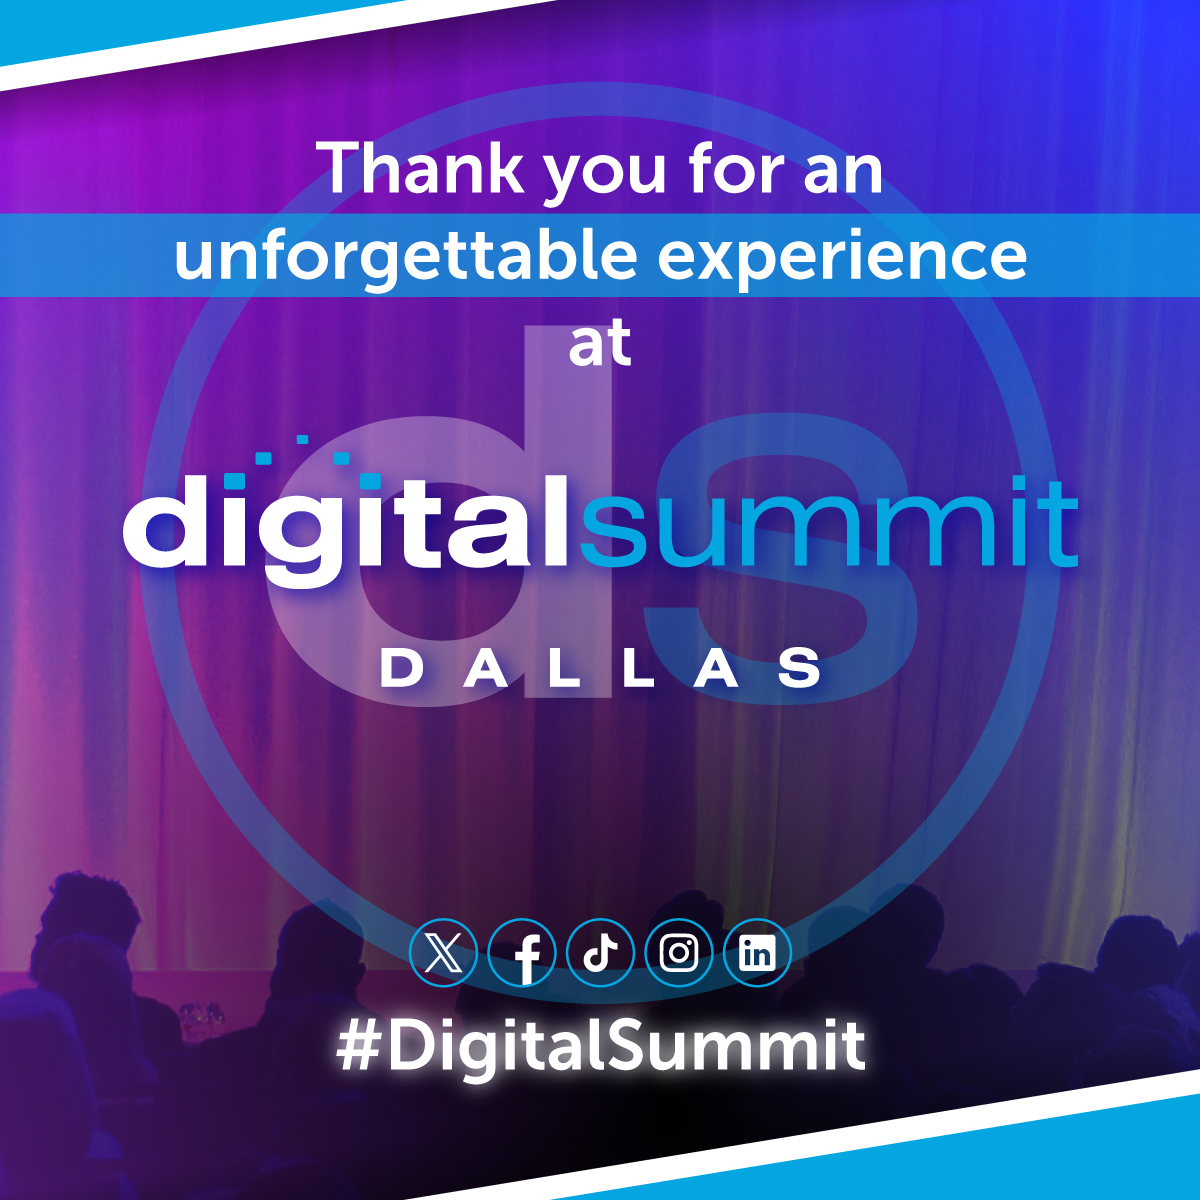 Big Texas-sized thanks to you all! What's in store for #DigitalSummit next year, you ask? We're spilling the tea soon😉